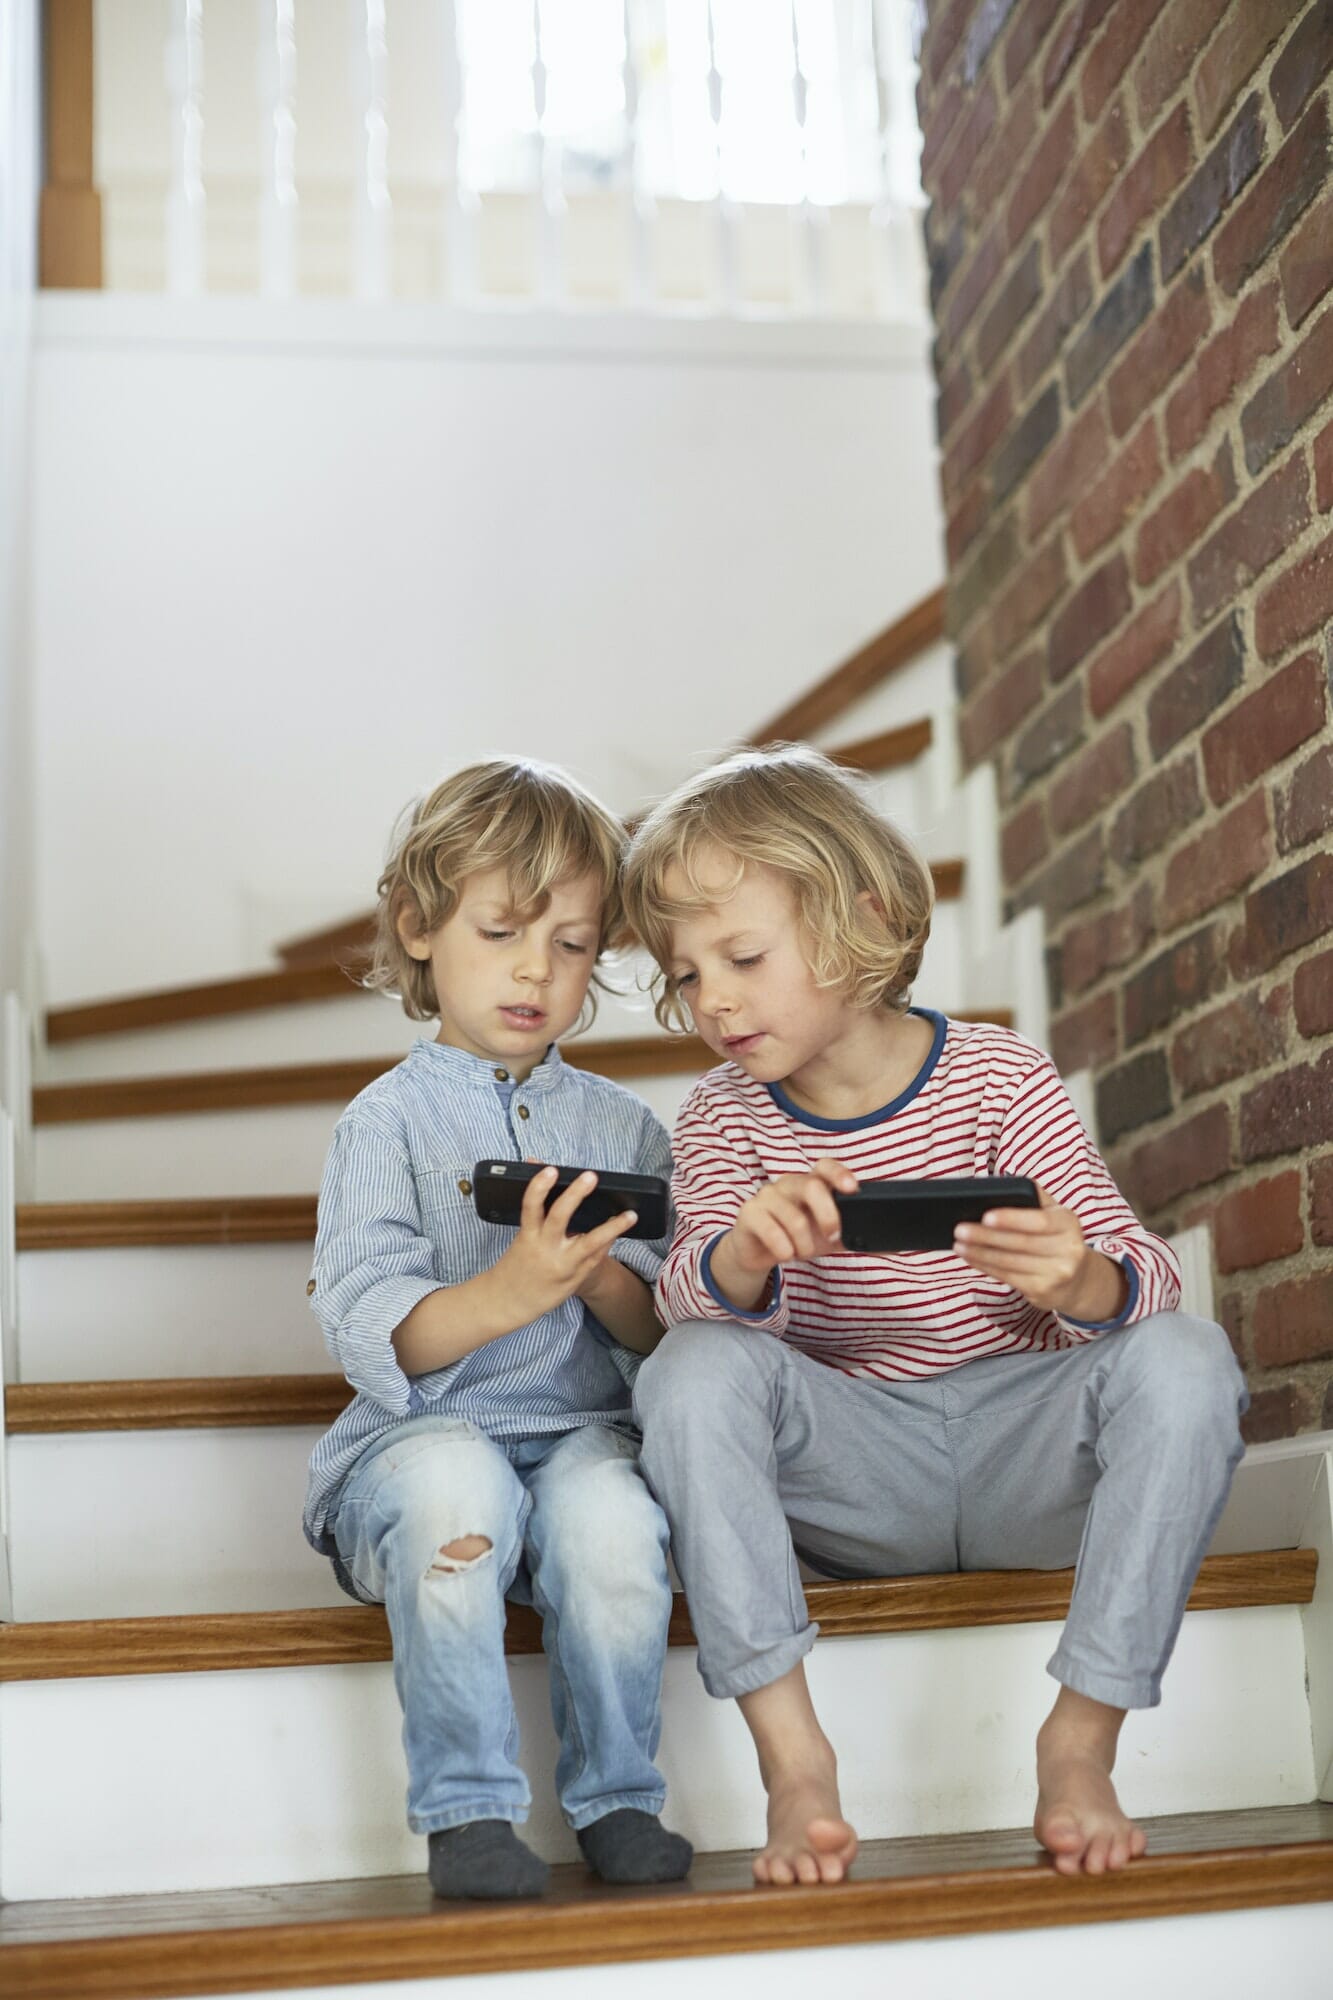 Two young boys, sitting on stairs, looking at smartphones